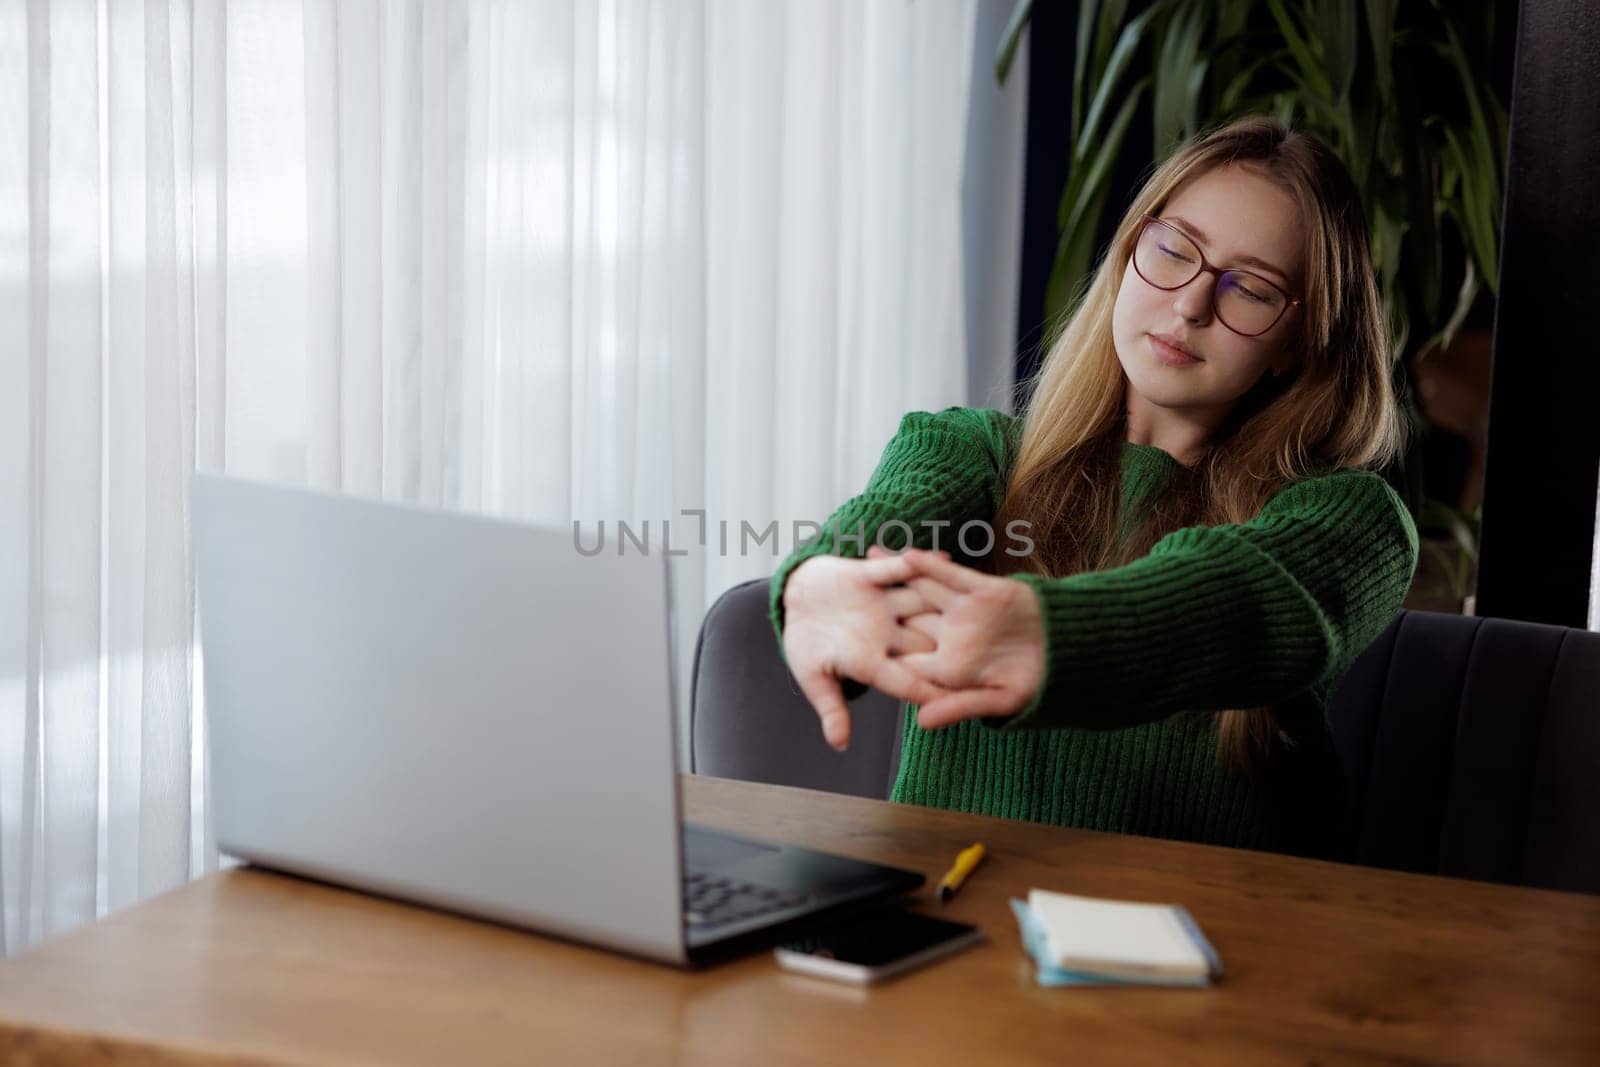 A woman is sitting at a desk in front of a laptop computer, stretching her arms. Keywords Table, Computer, Laptop, Wood, Gesture, Personal computer, Flooring, Hardwood, Wood stain, Thumb